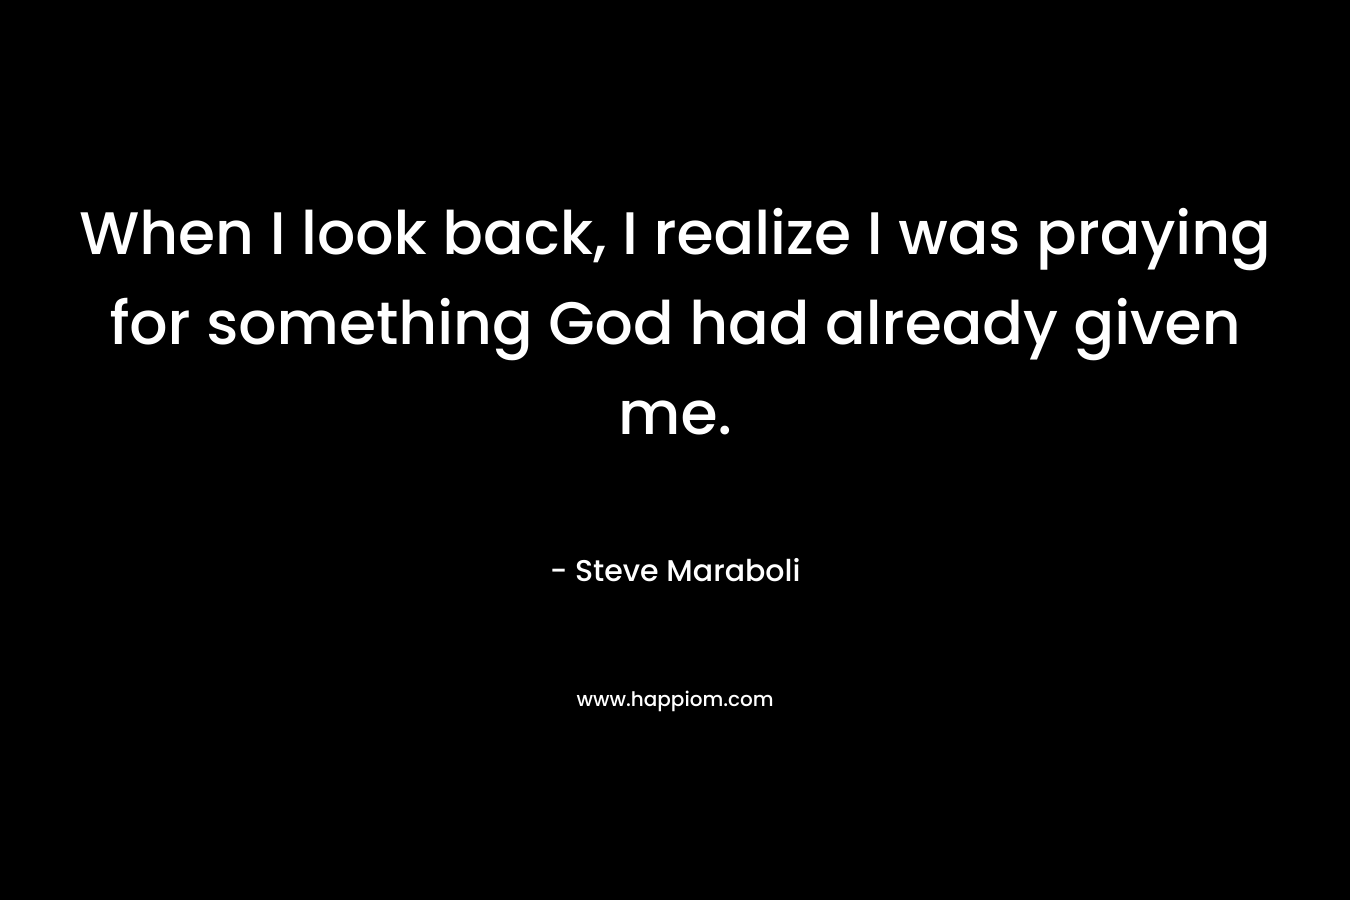 When I look back, I realize I was praying for something God had already given me.